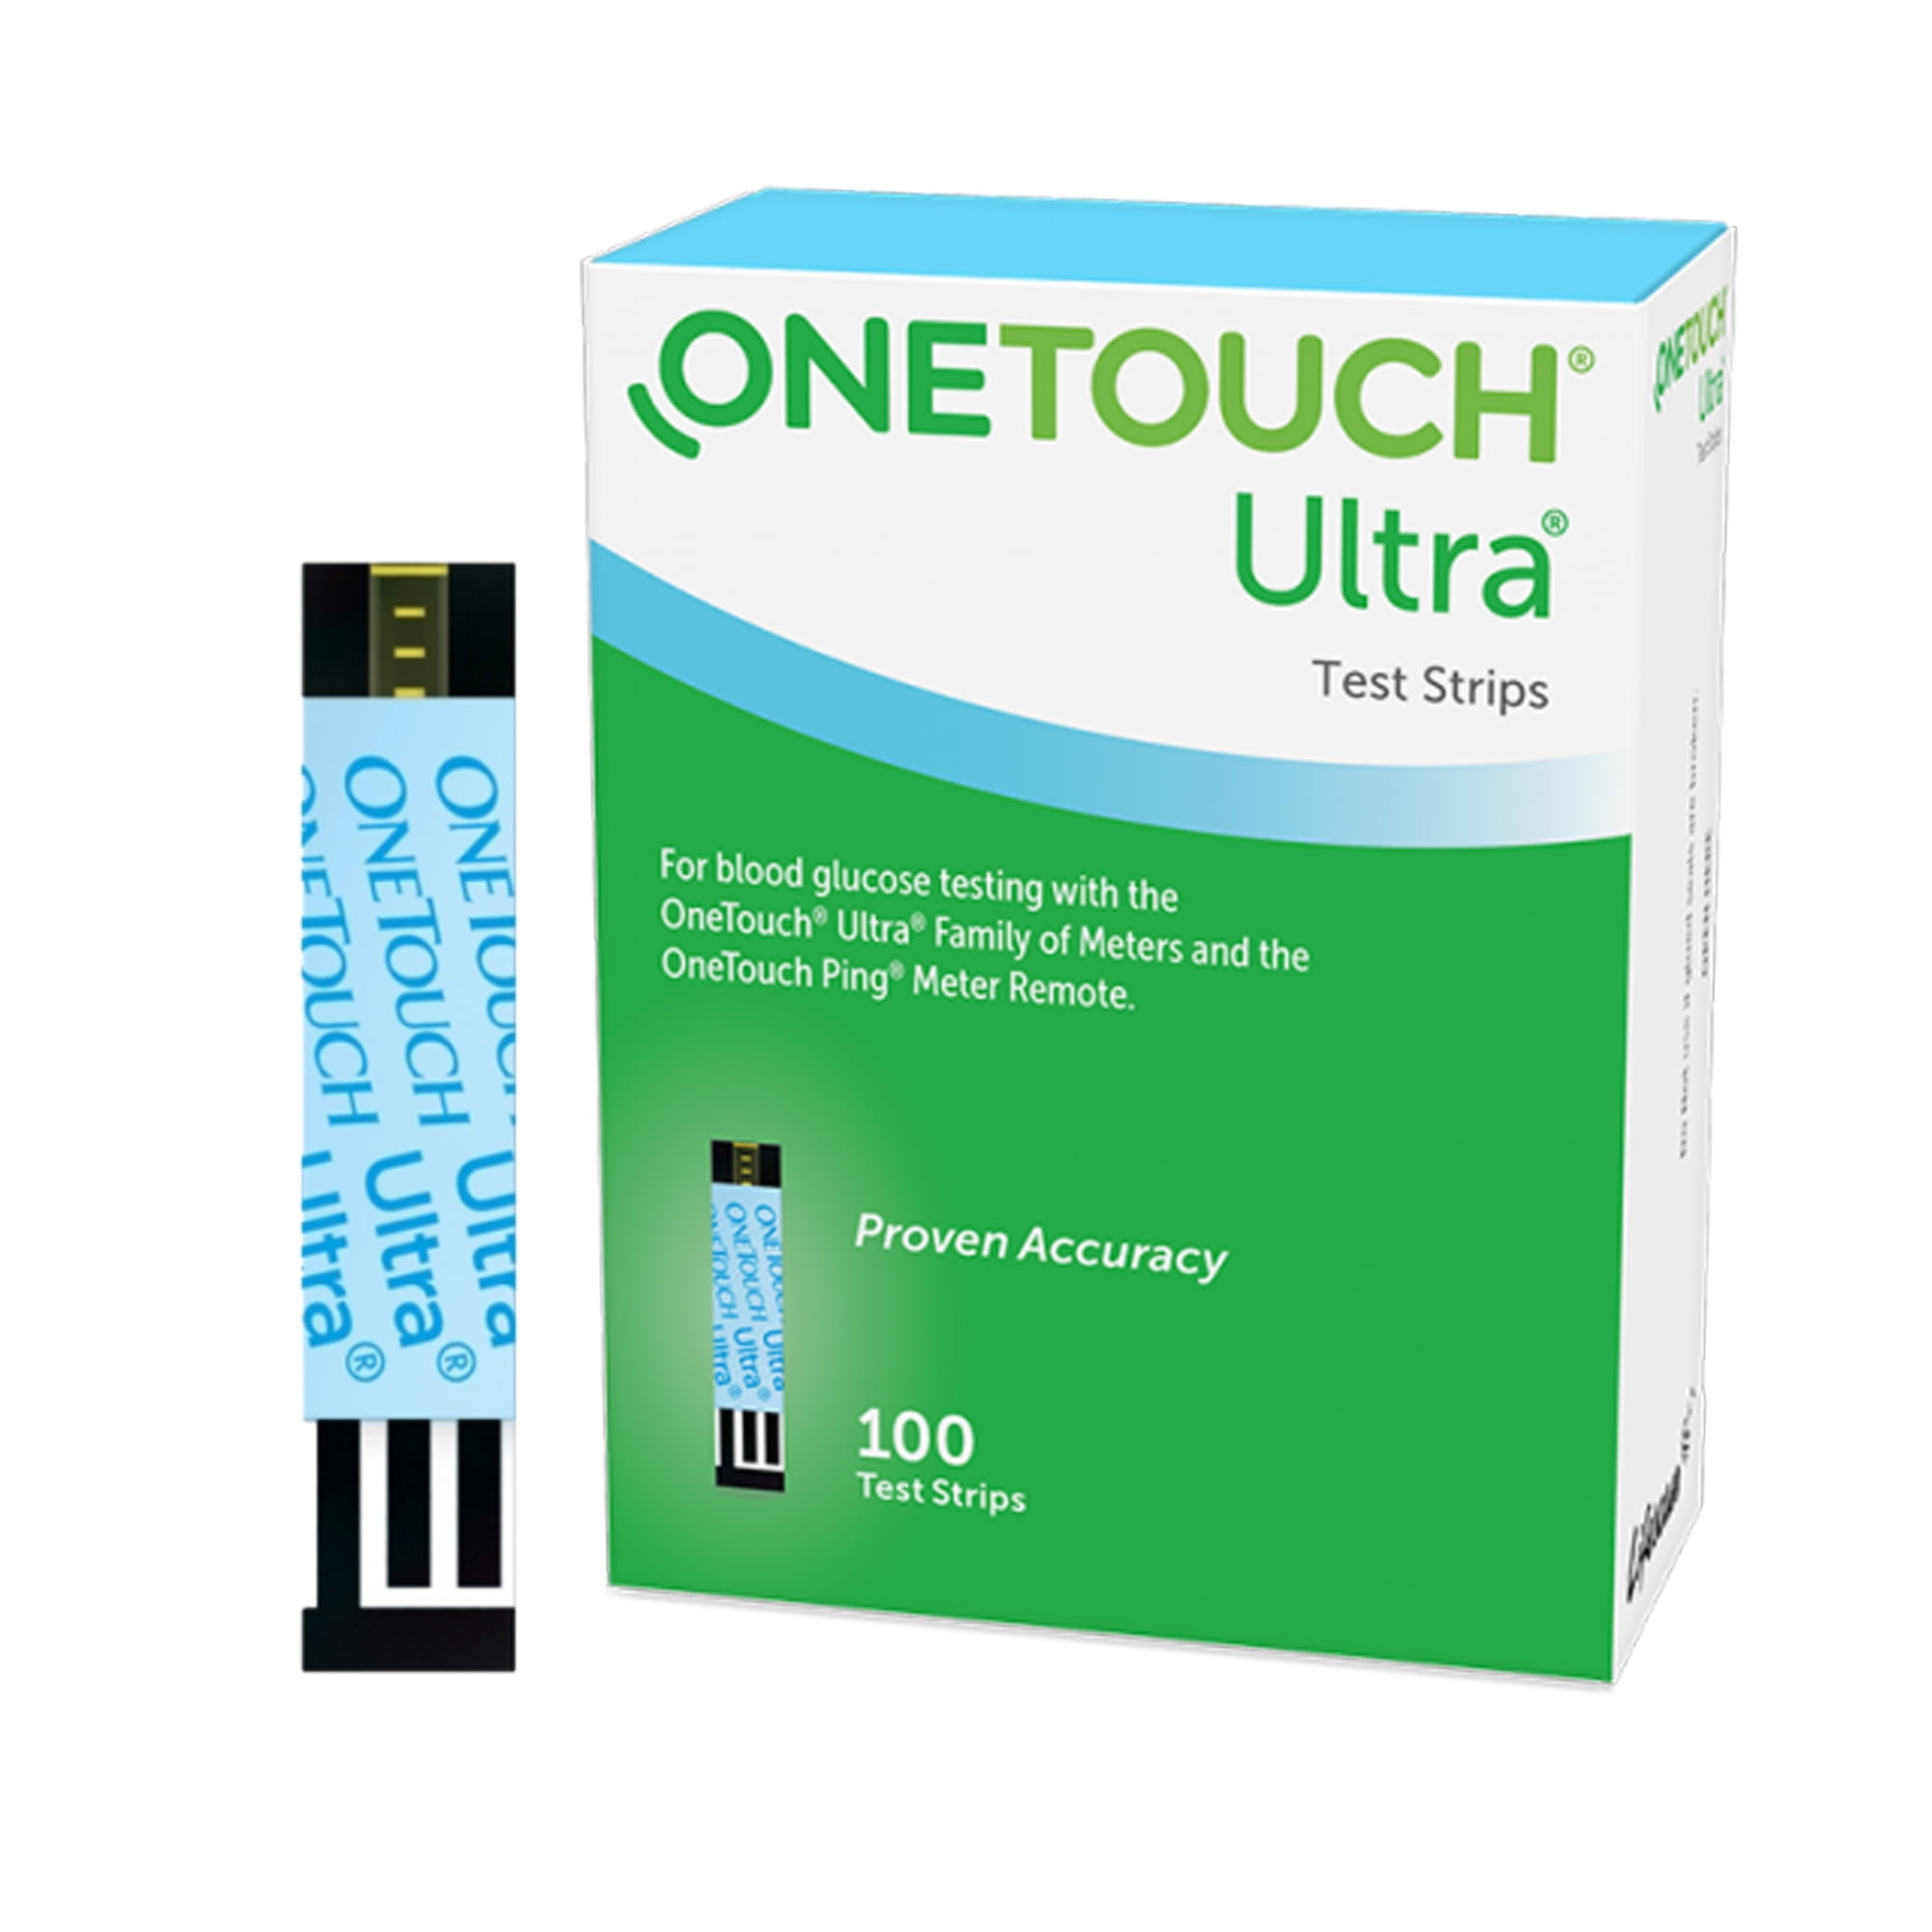 OneTouch Ultra Diabetes Test Strips - 25 Count 